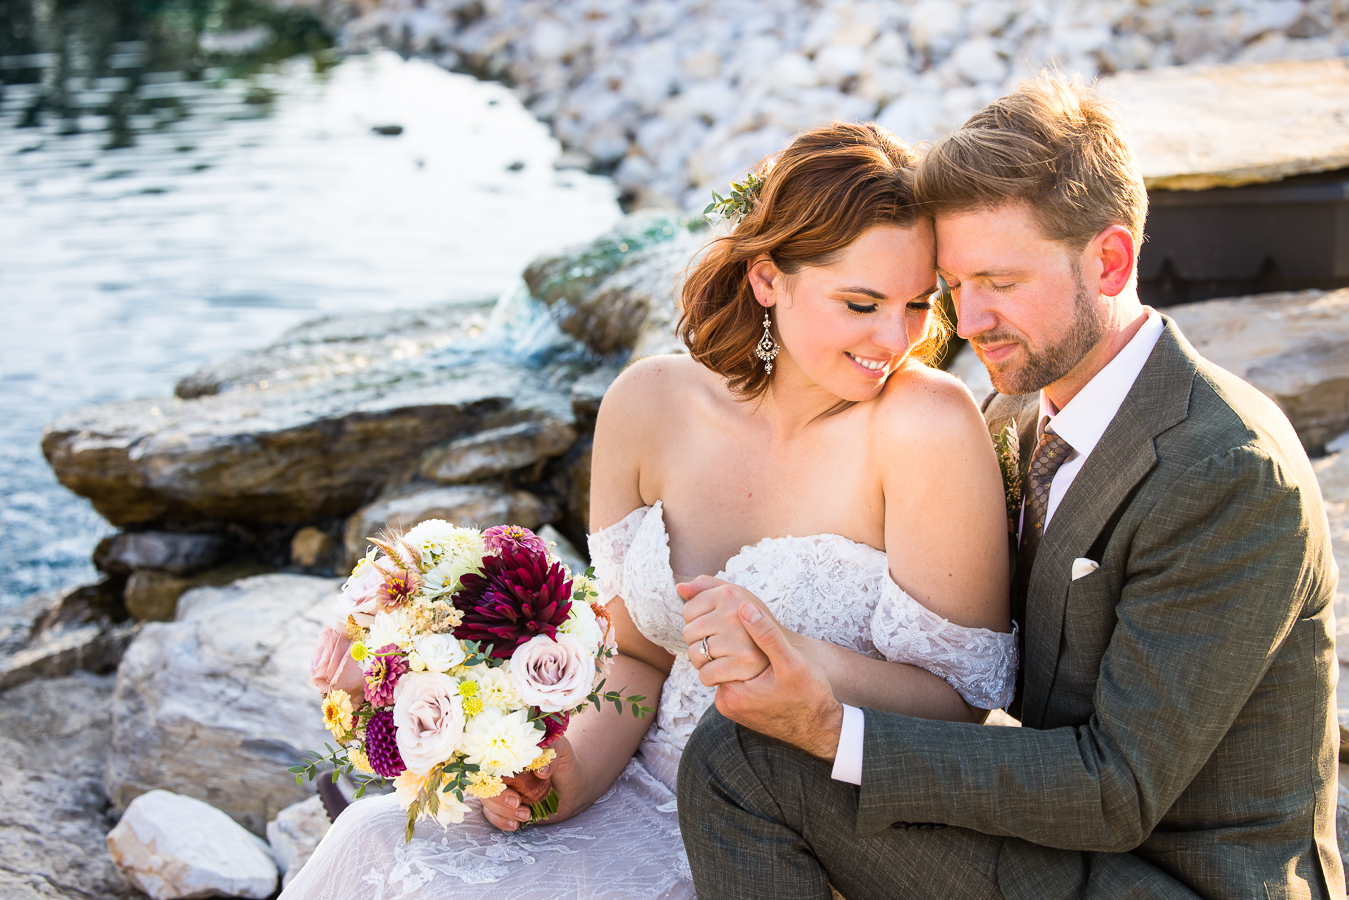 image of the couple as they sit down against the rocks and the pond while holding hands and putting their heads together as the bride holds flowers by iron willow floral designs